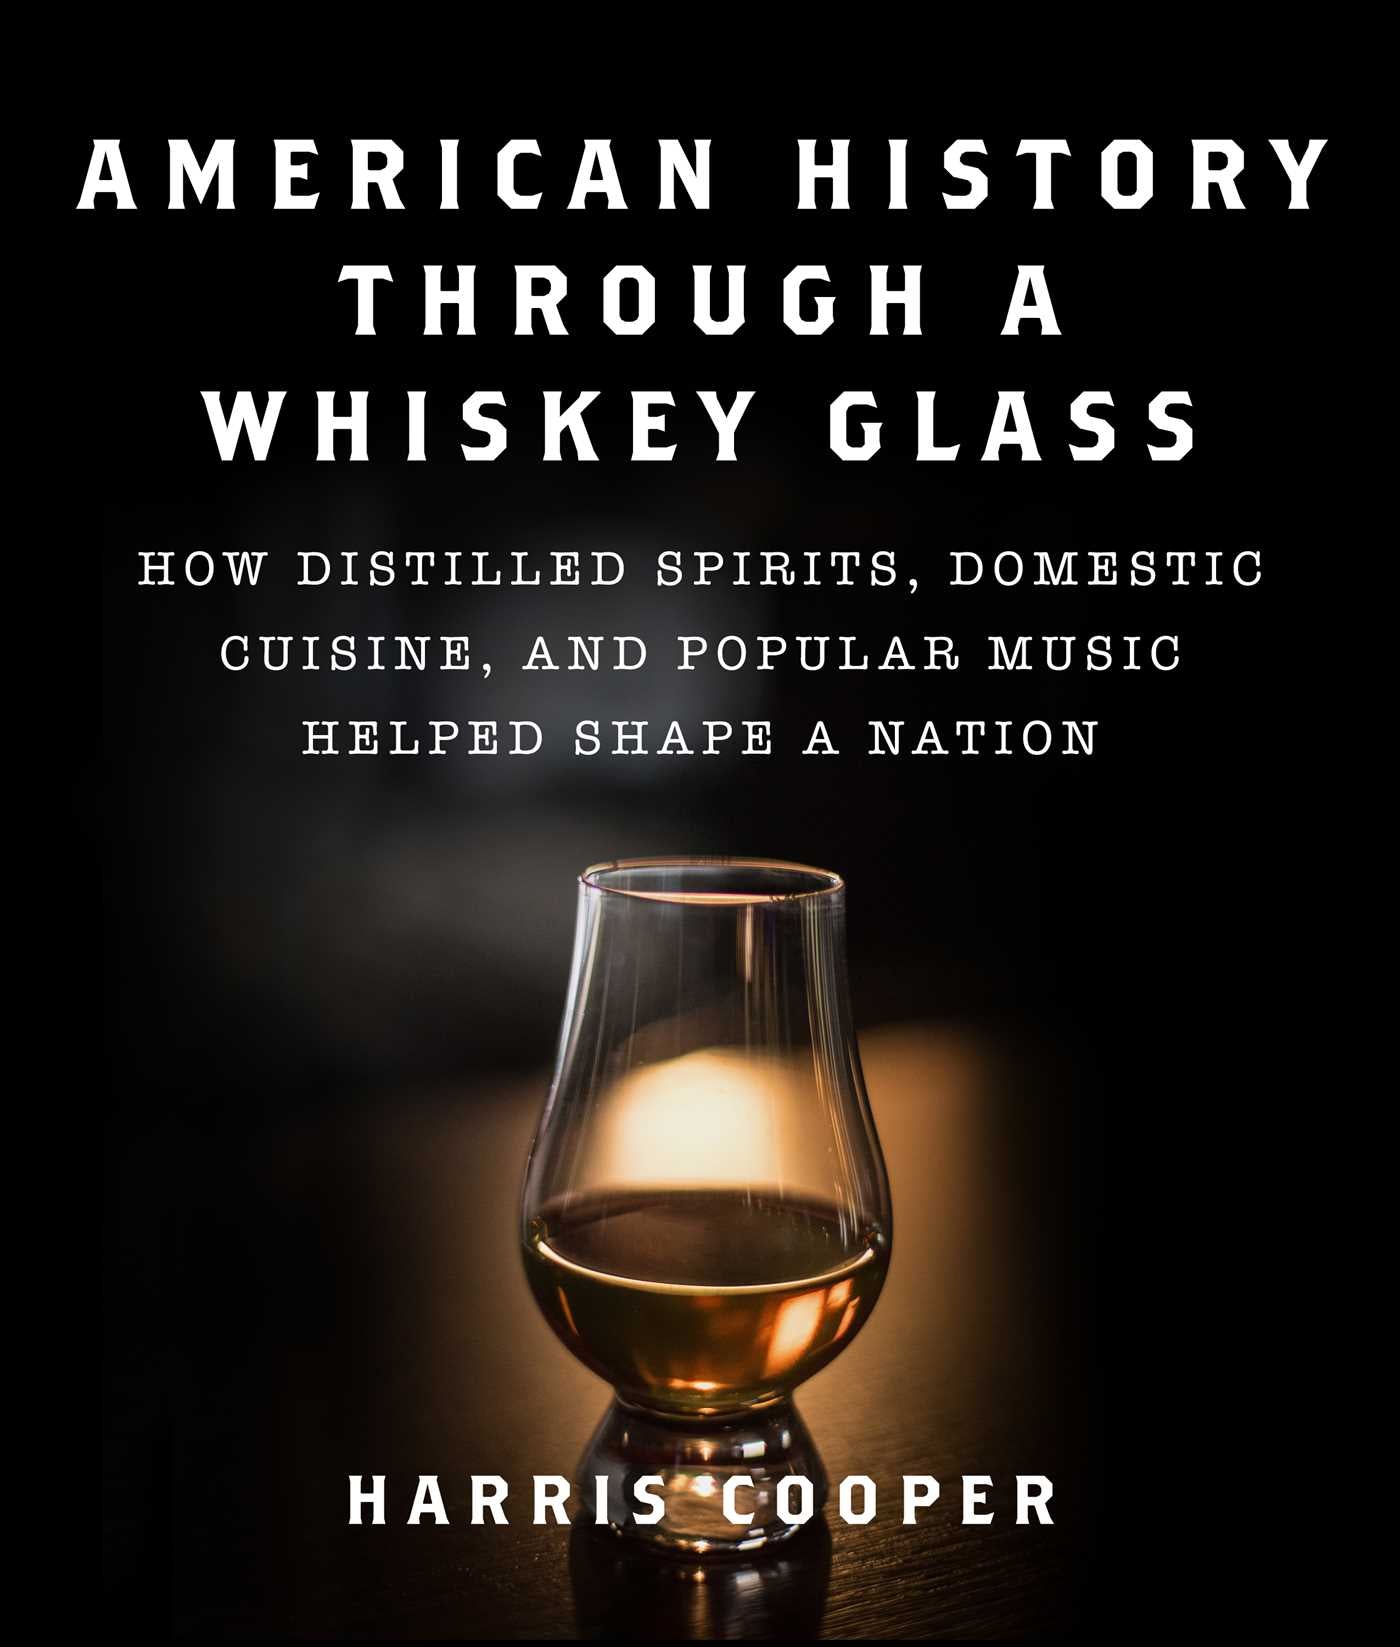 American History Through a Whiskey Glass : How Distilled Spirits, Domestic Cuisine, and Popular Music Helped Shape a Nation